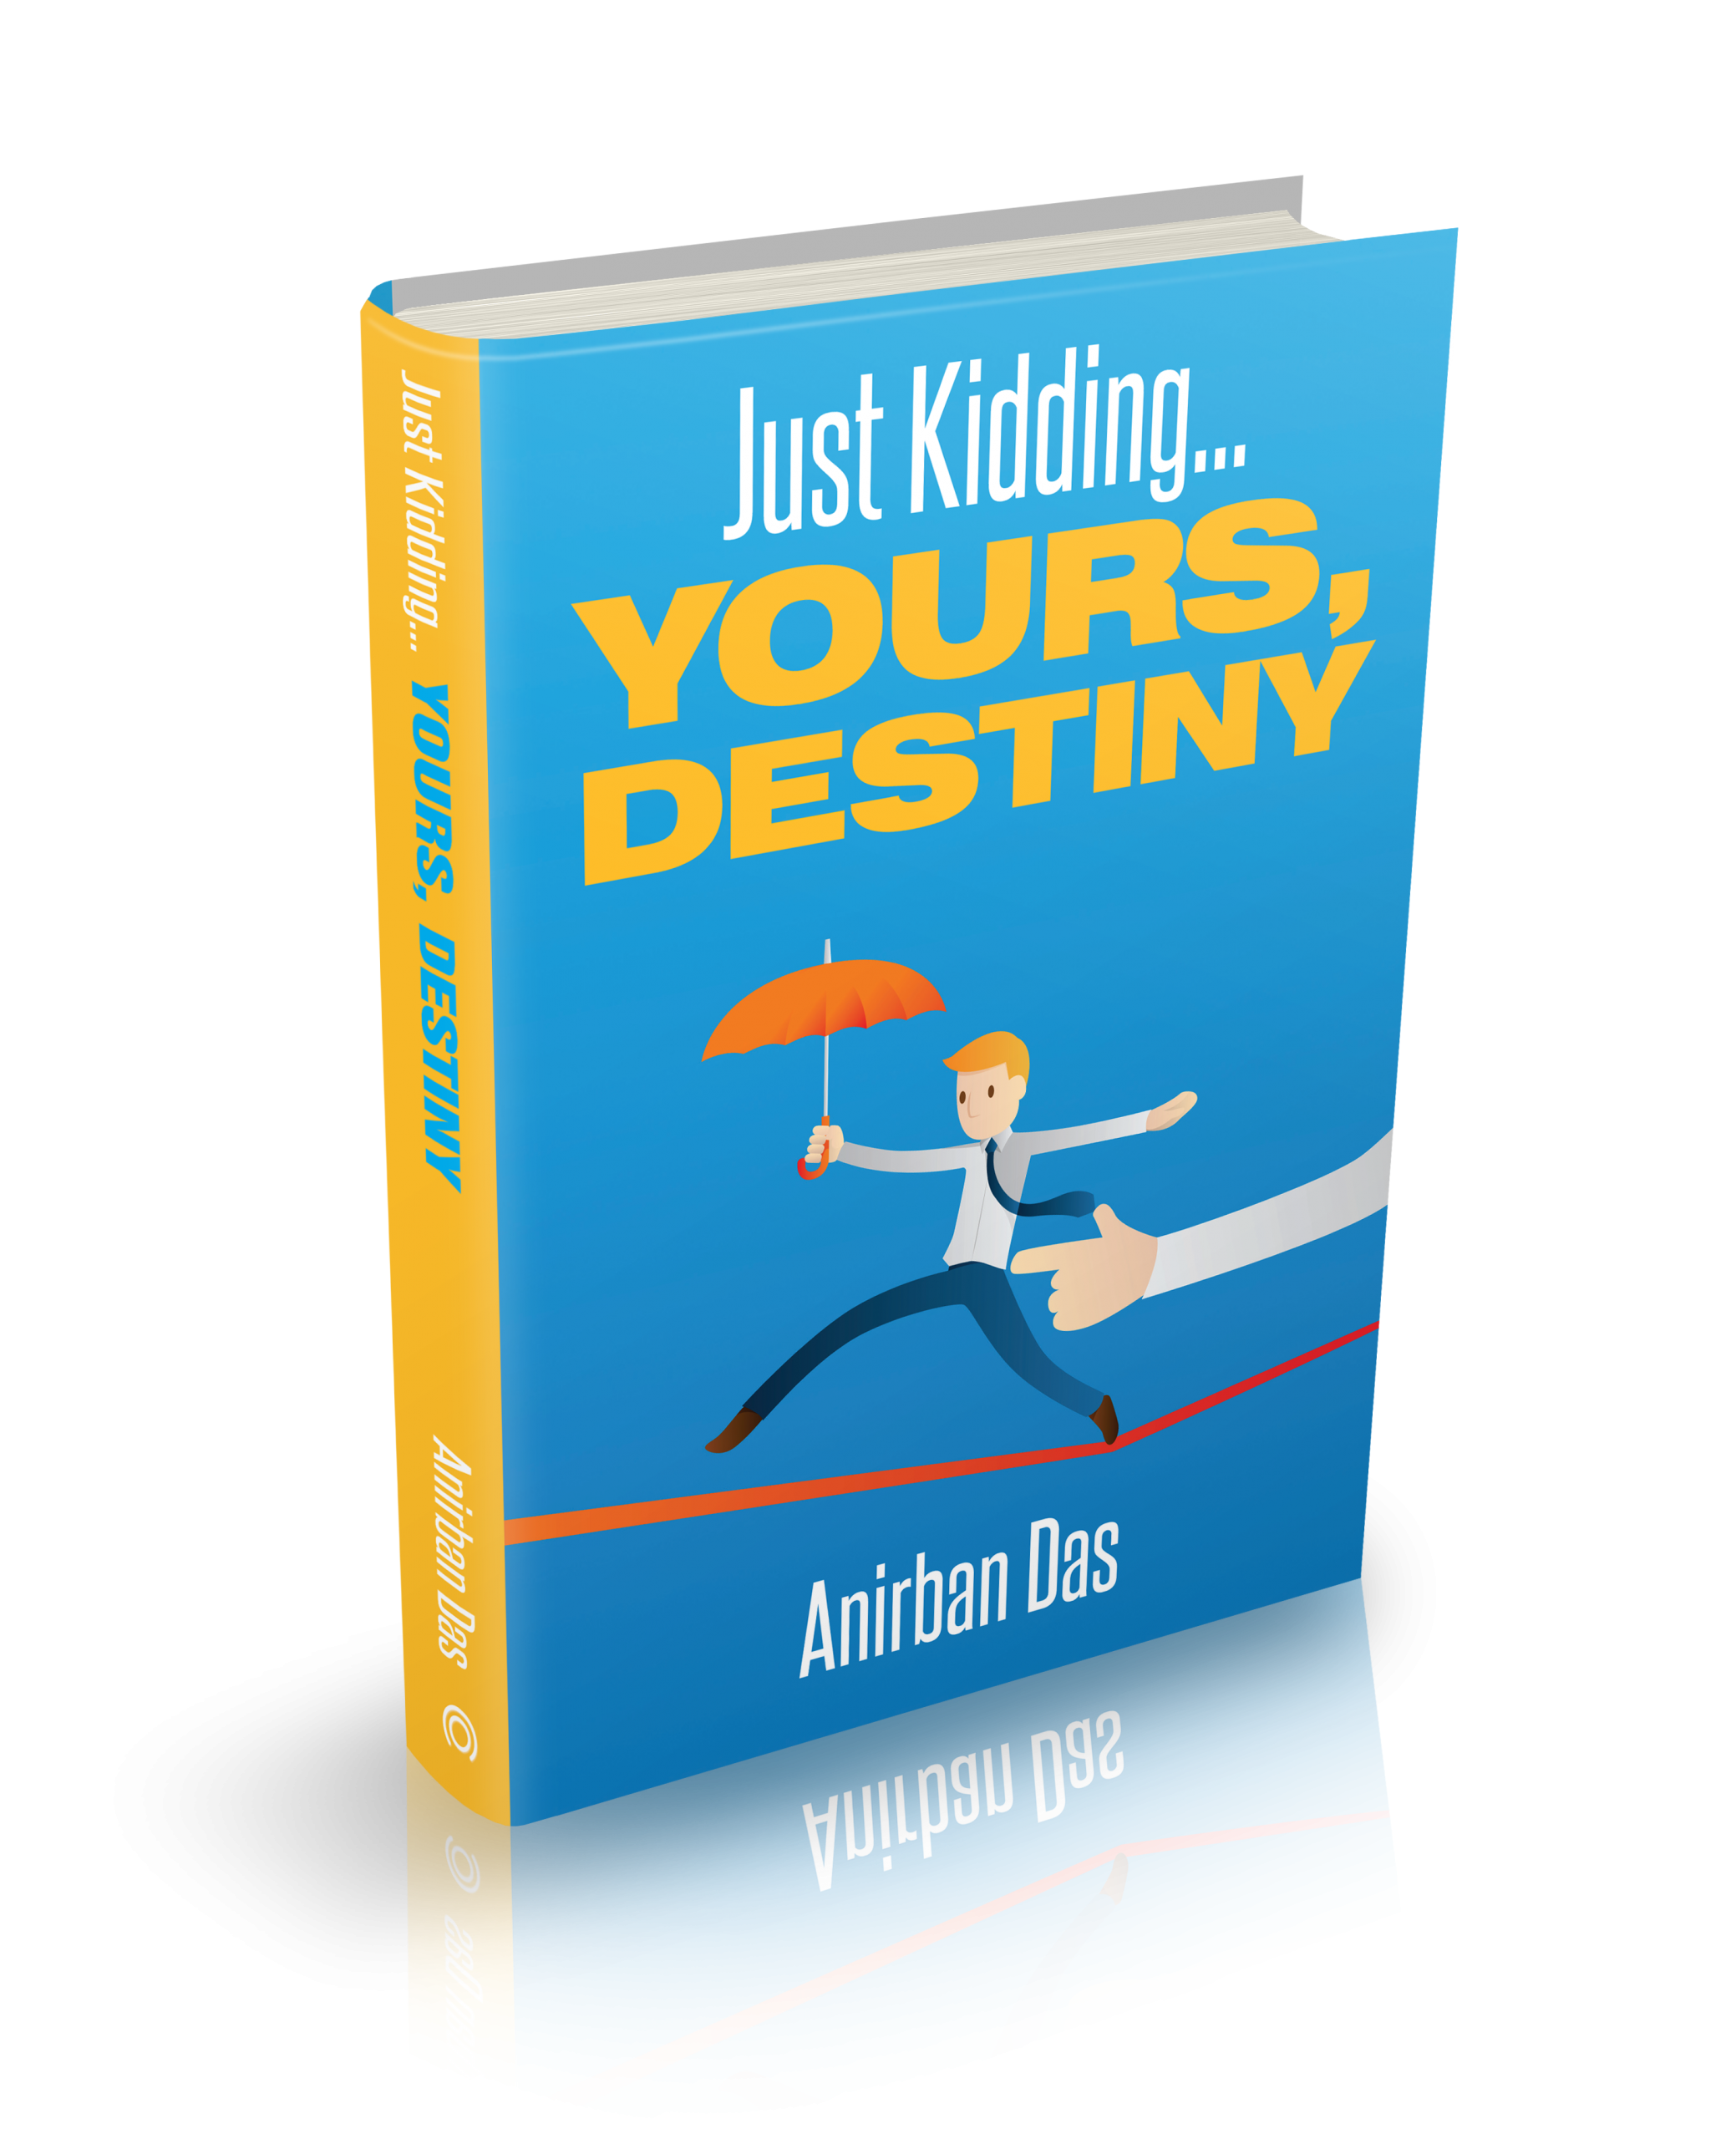 Book Review: Just Kidding yours Destiny by Anirban Das